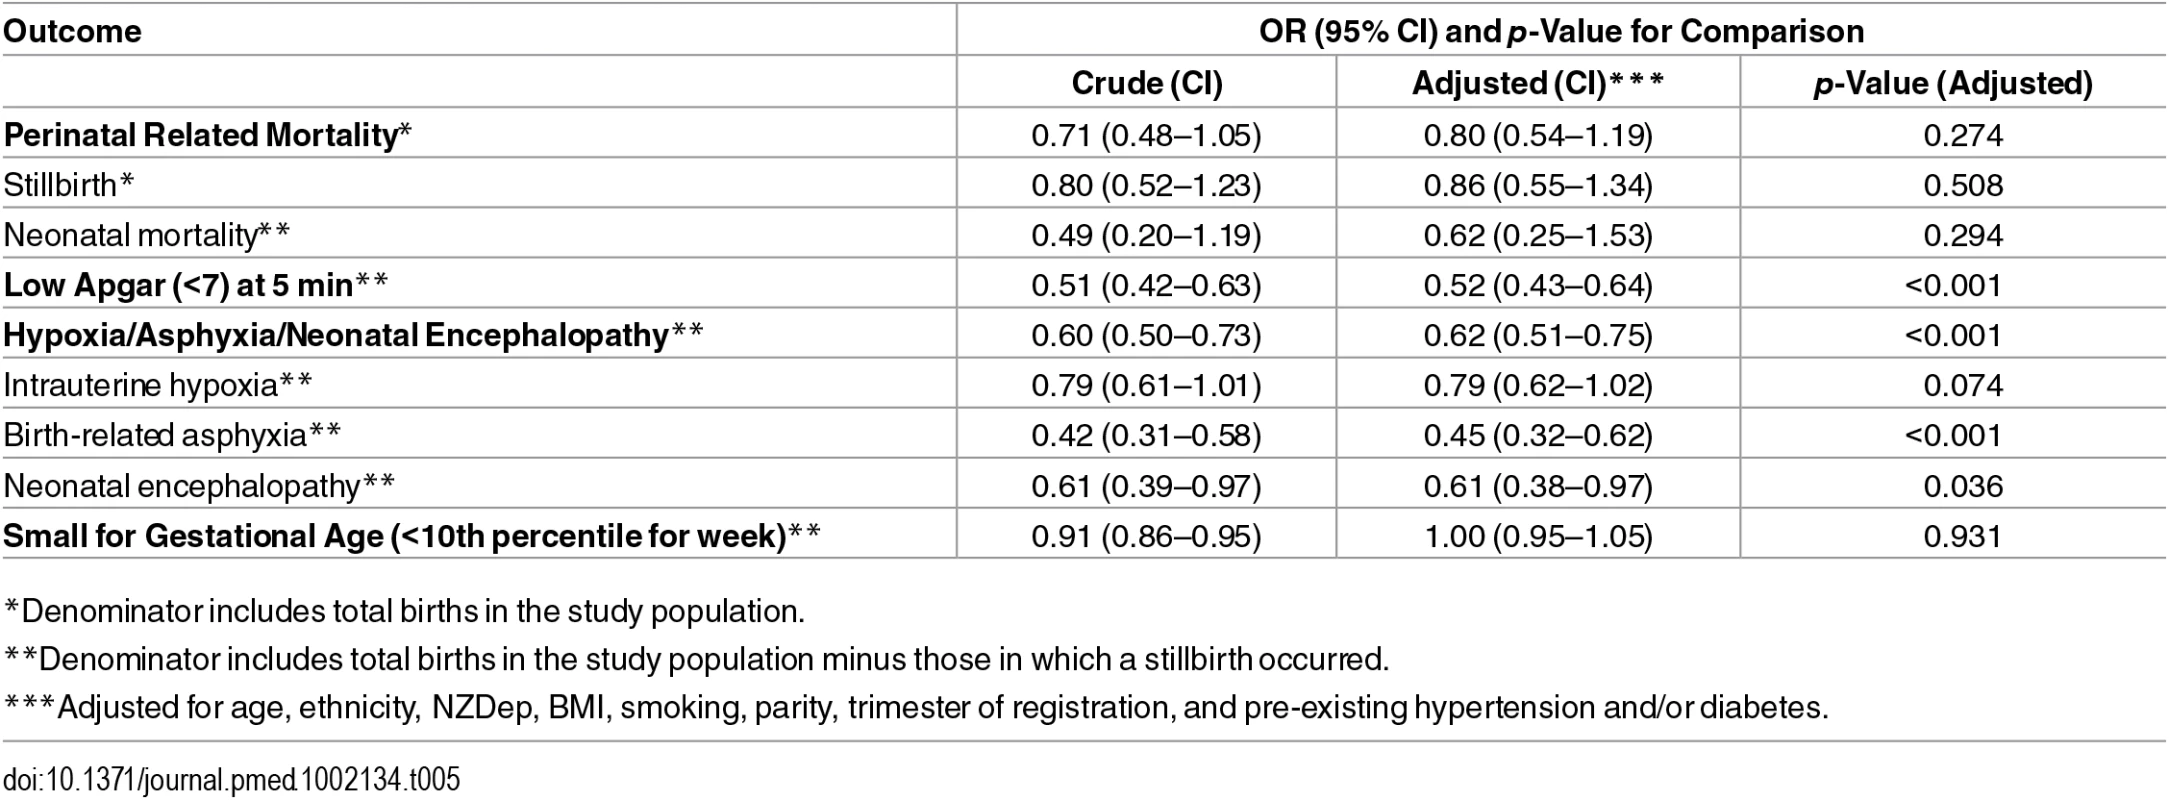 Crude and adjusted ORs (with <i>p</i>-value) for all outcomes comparing medical-led to midwife-led care.